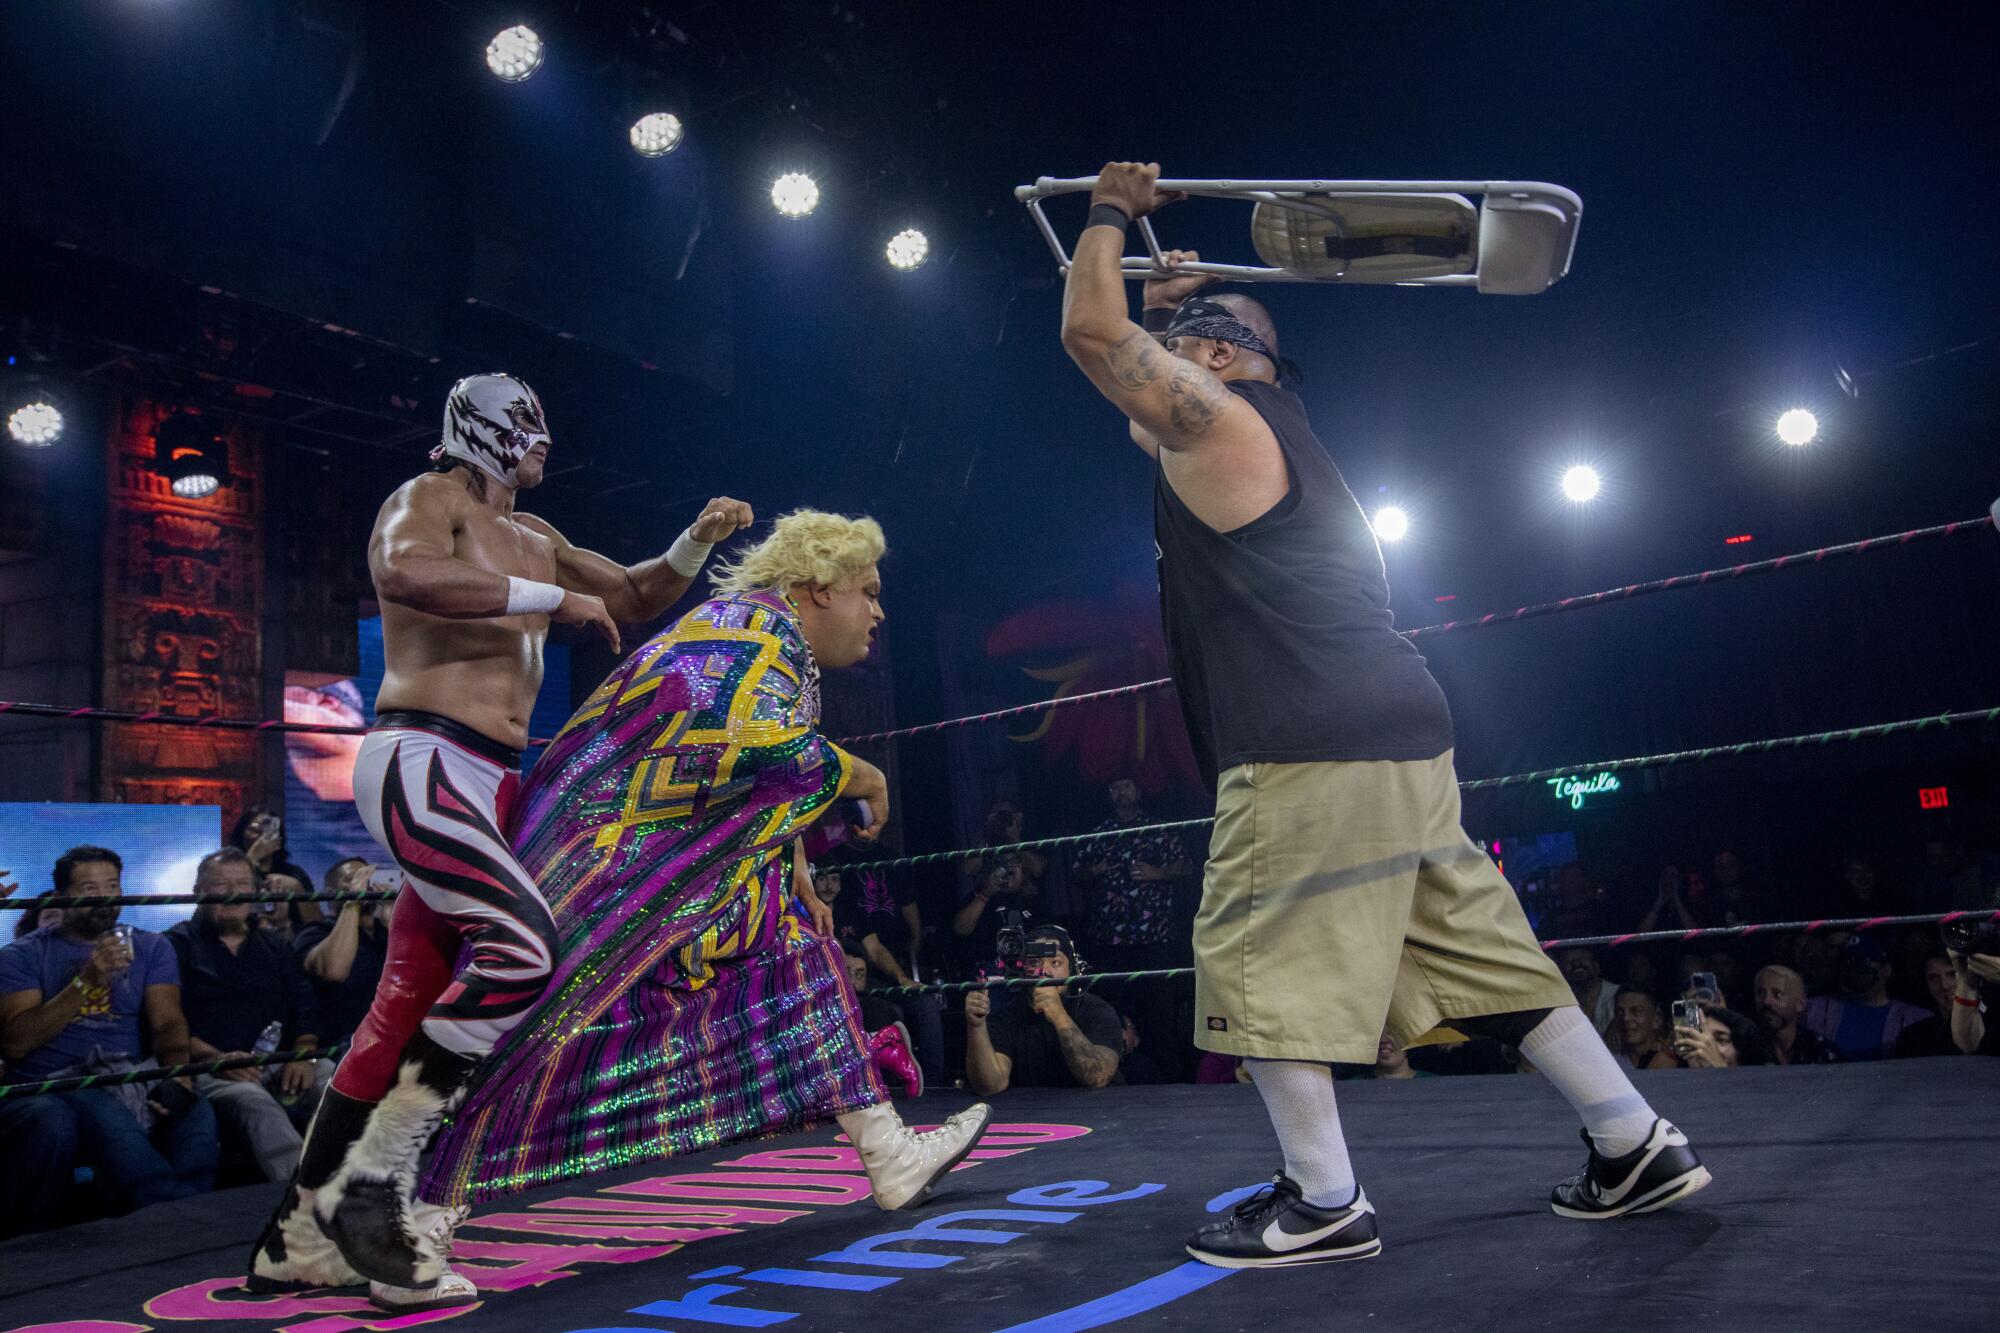 Li'l Cholo goes after Paquita with a chair 